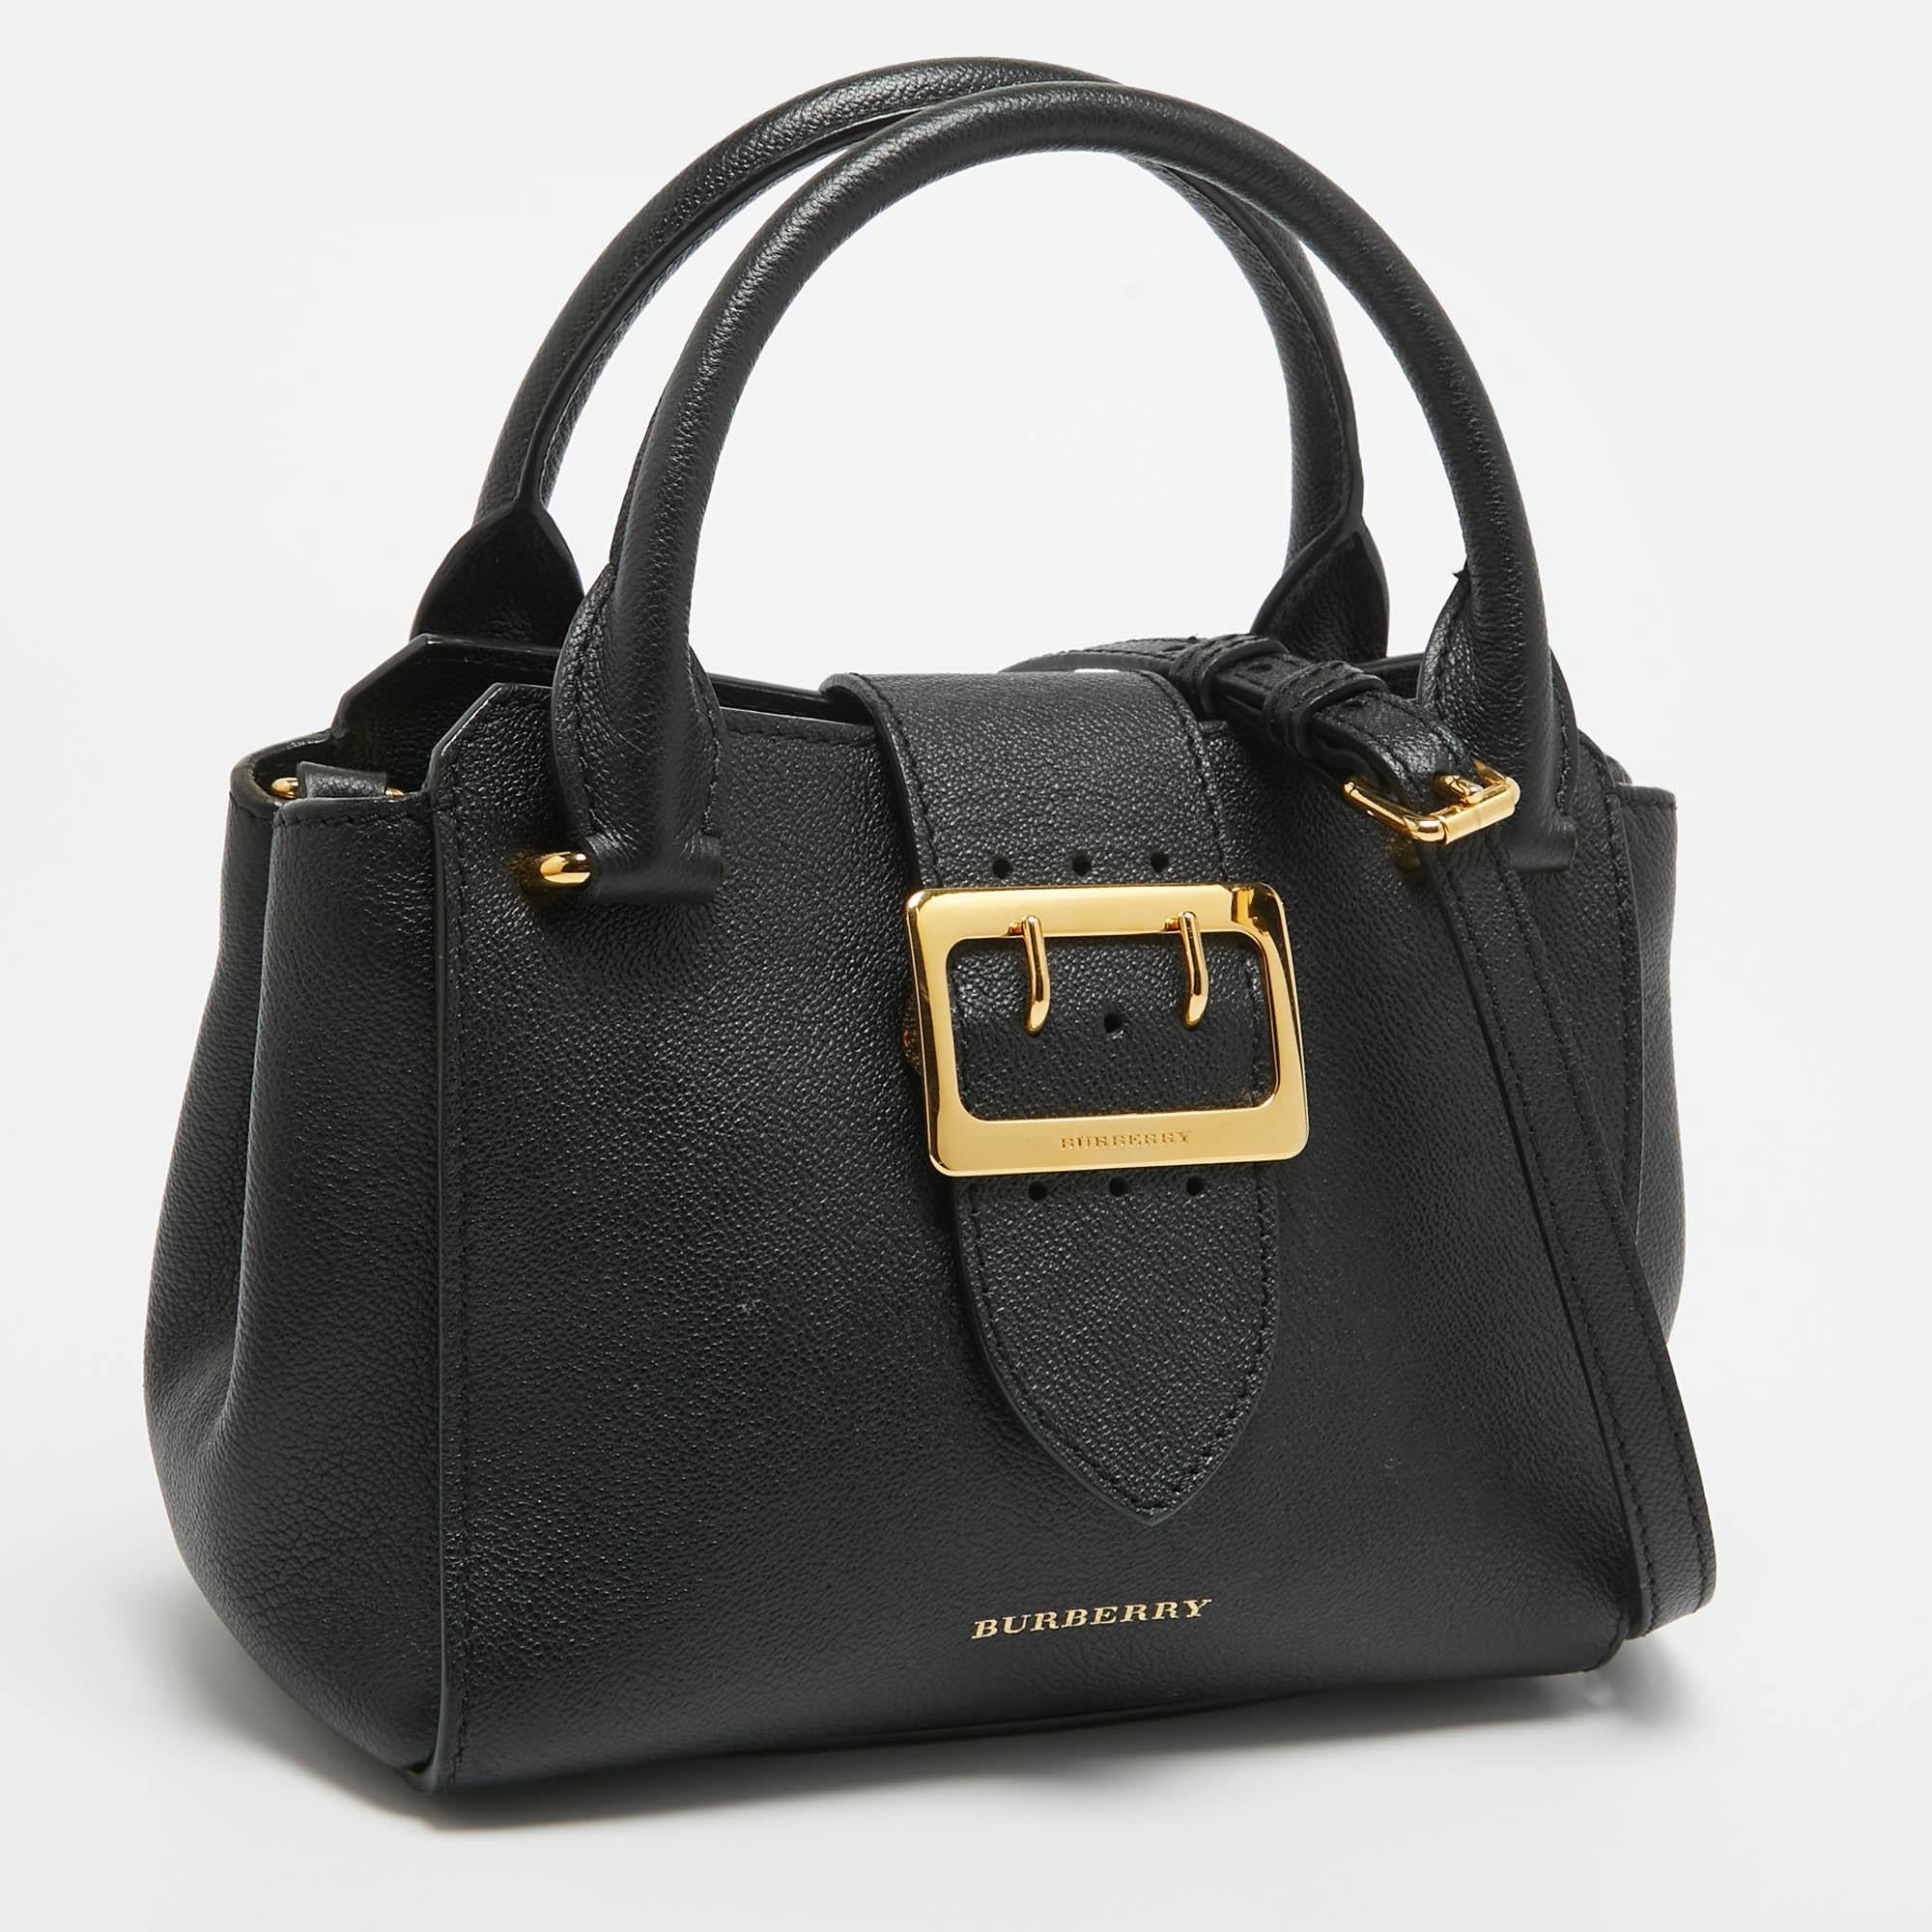 Burberry Black Leather Buckle Flap Tote For Sale 16